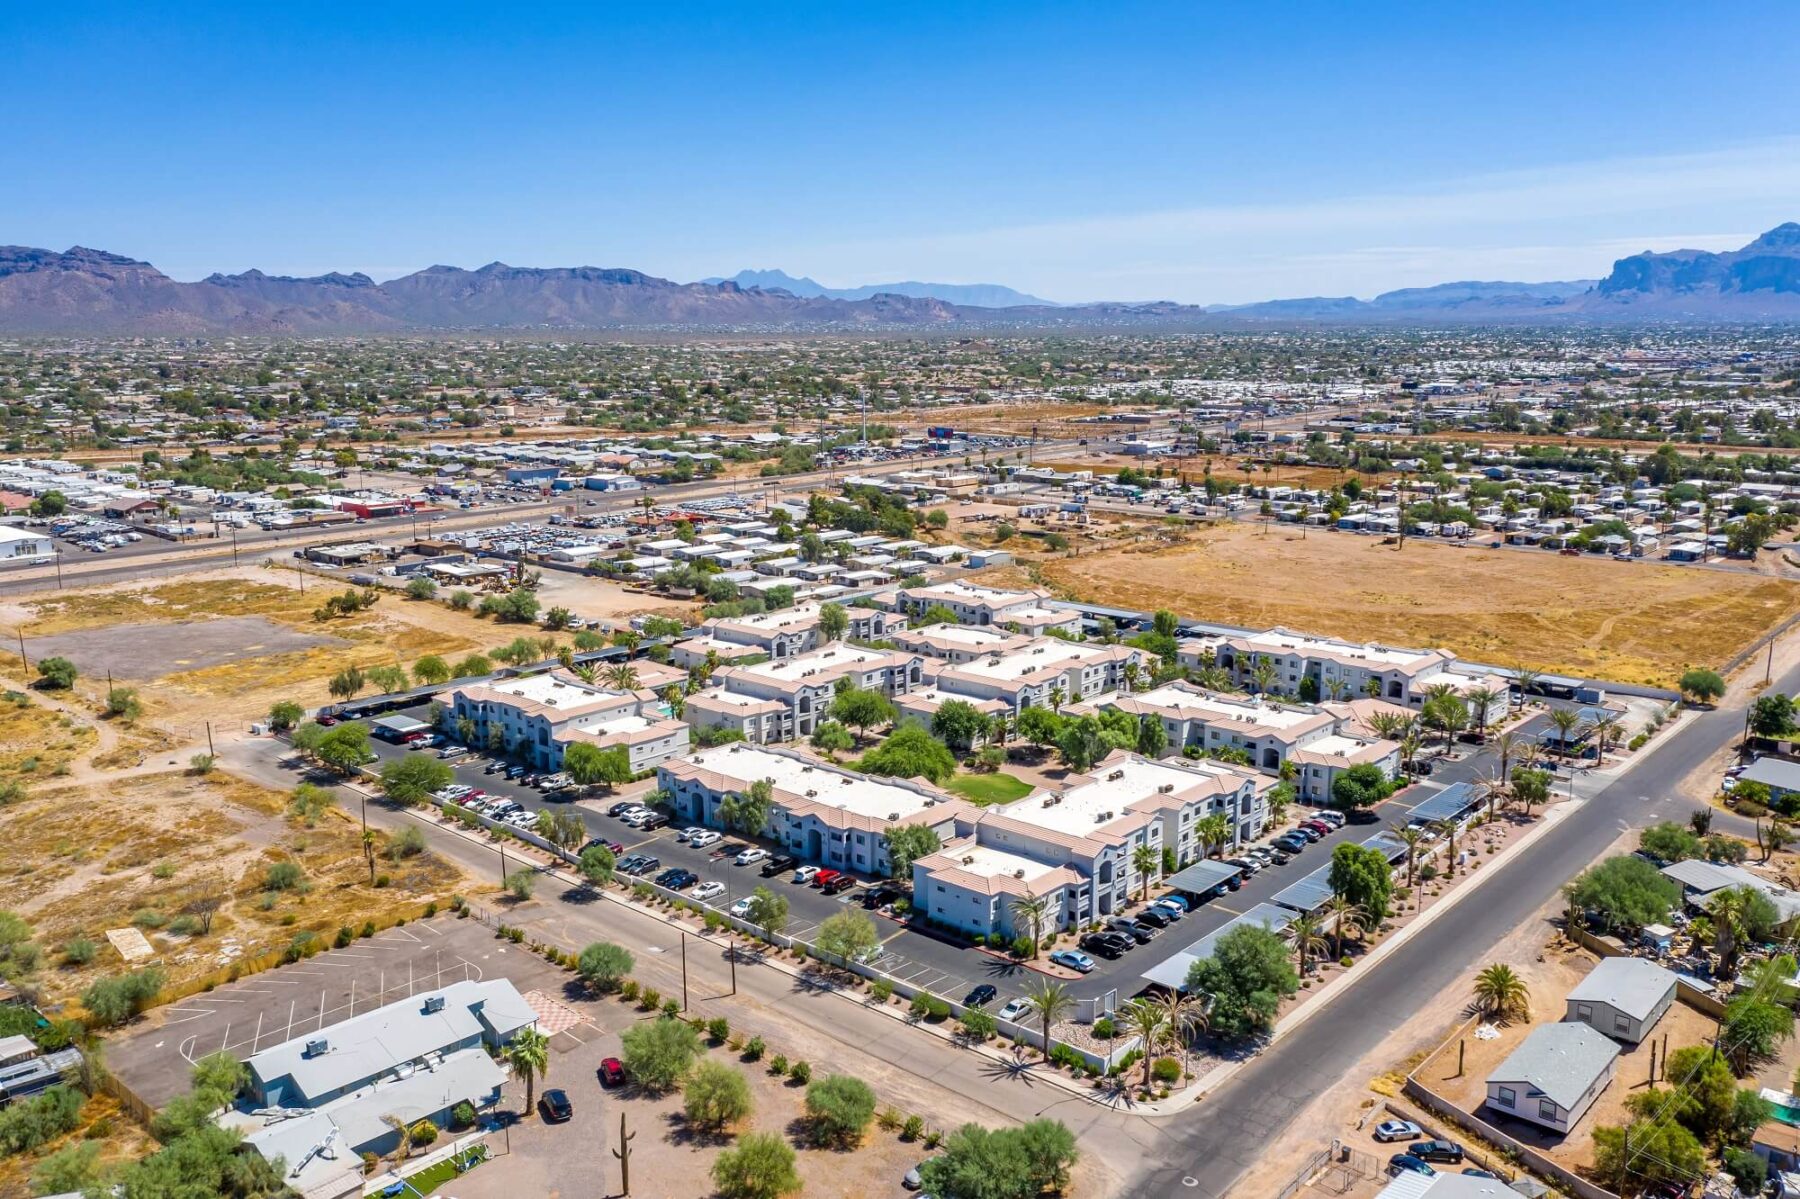 Aerial view of community, showing surrounding suburbs and mountains in the far distance